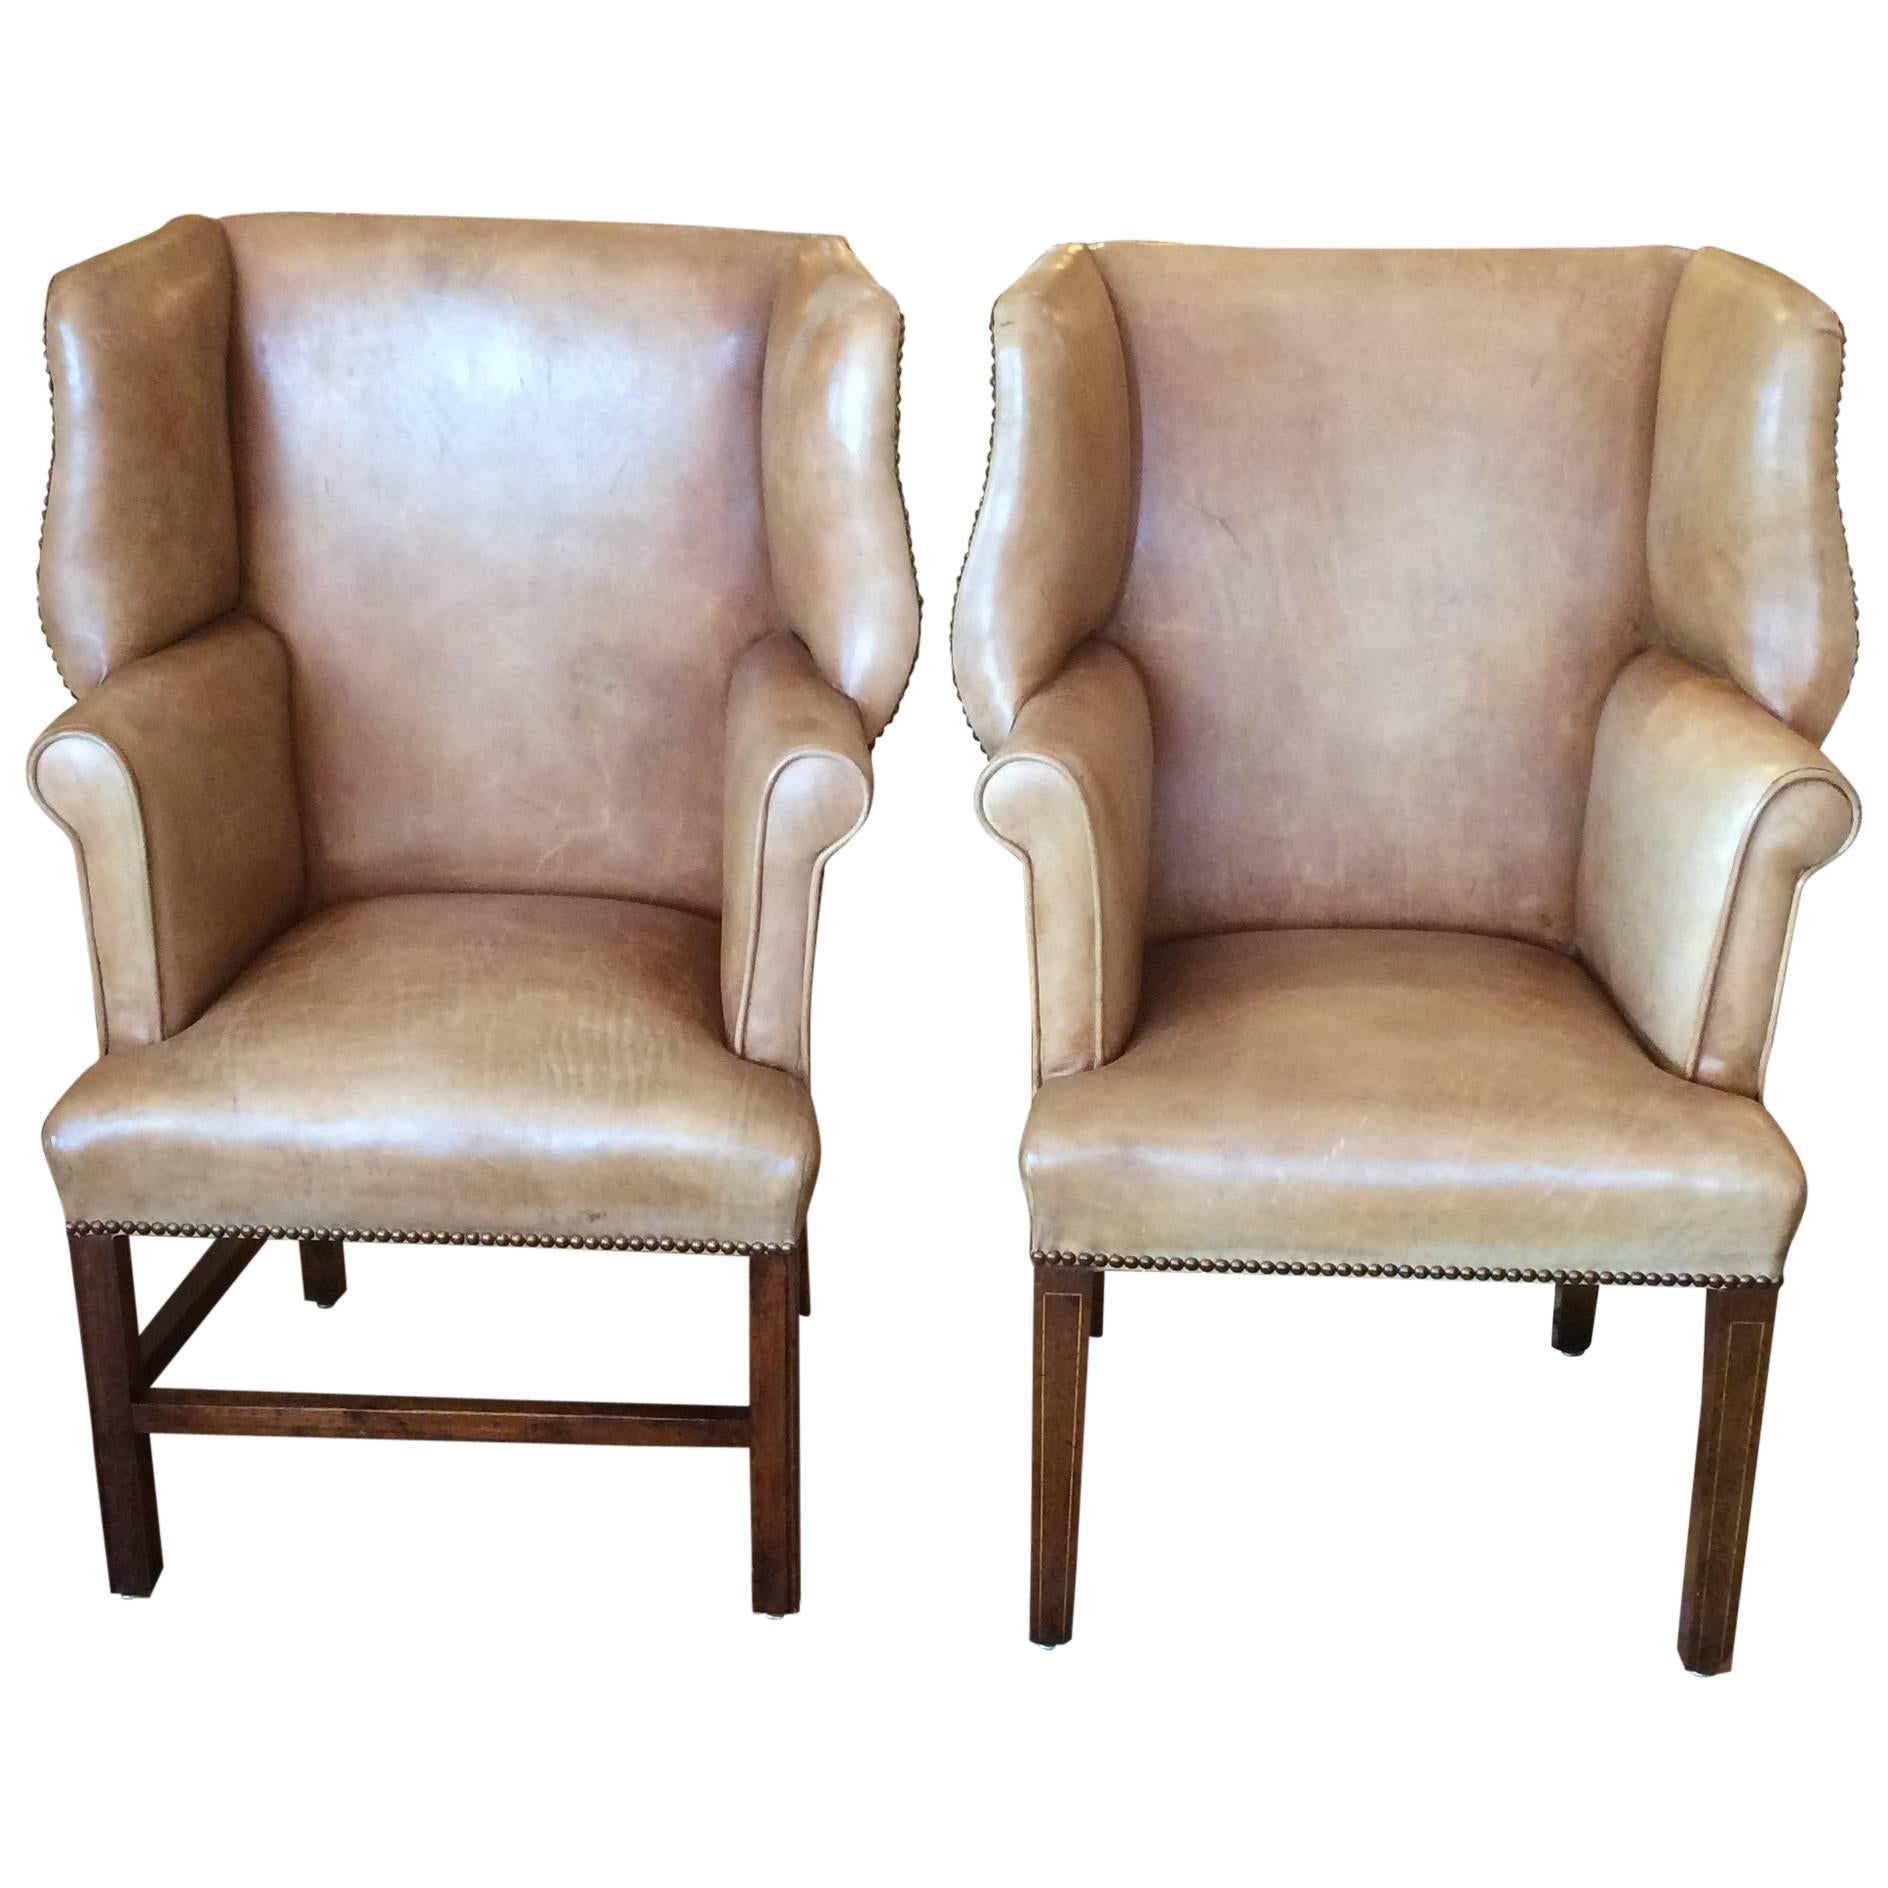 Pair of Petite Distressed Leather Chippendale Style Wing Chairs